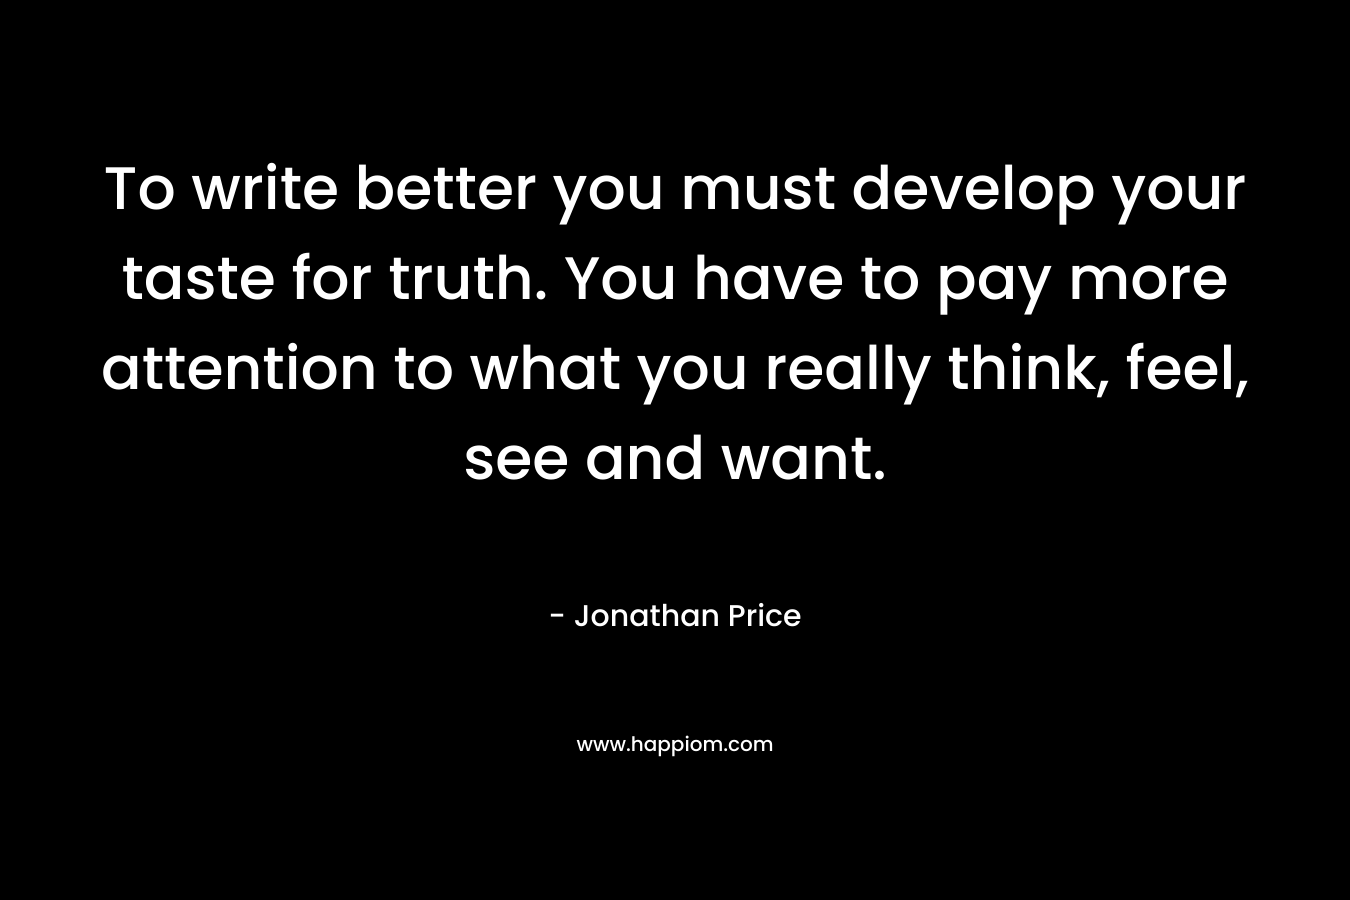 To write better you must develop your taste for truth. You have to pay more attention to what you really think, feel, see and want.